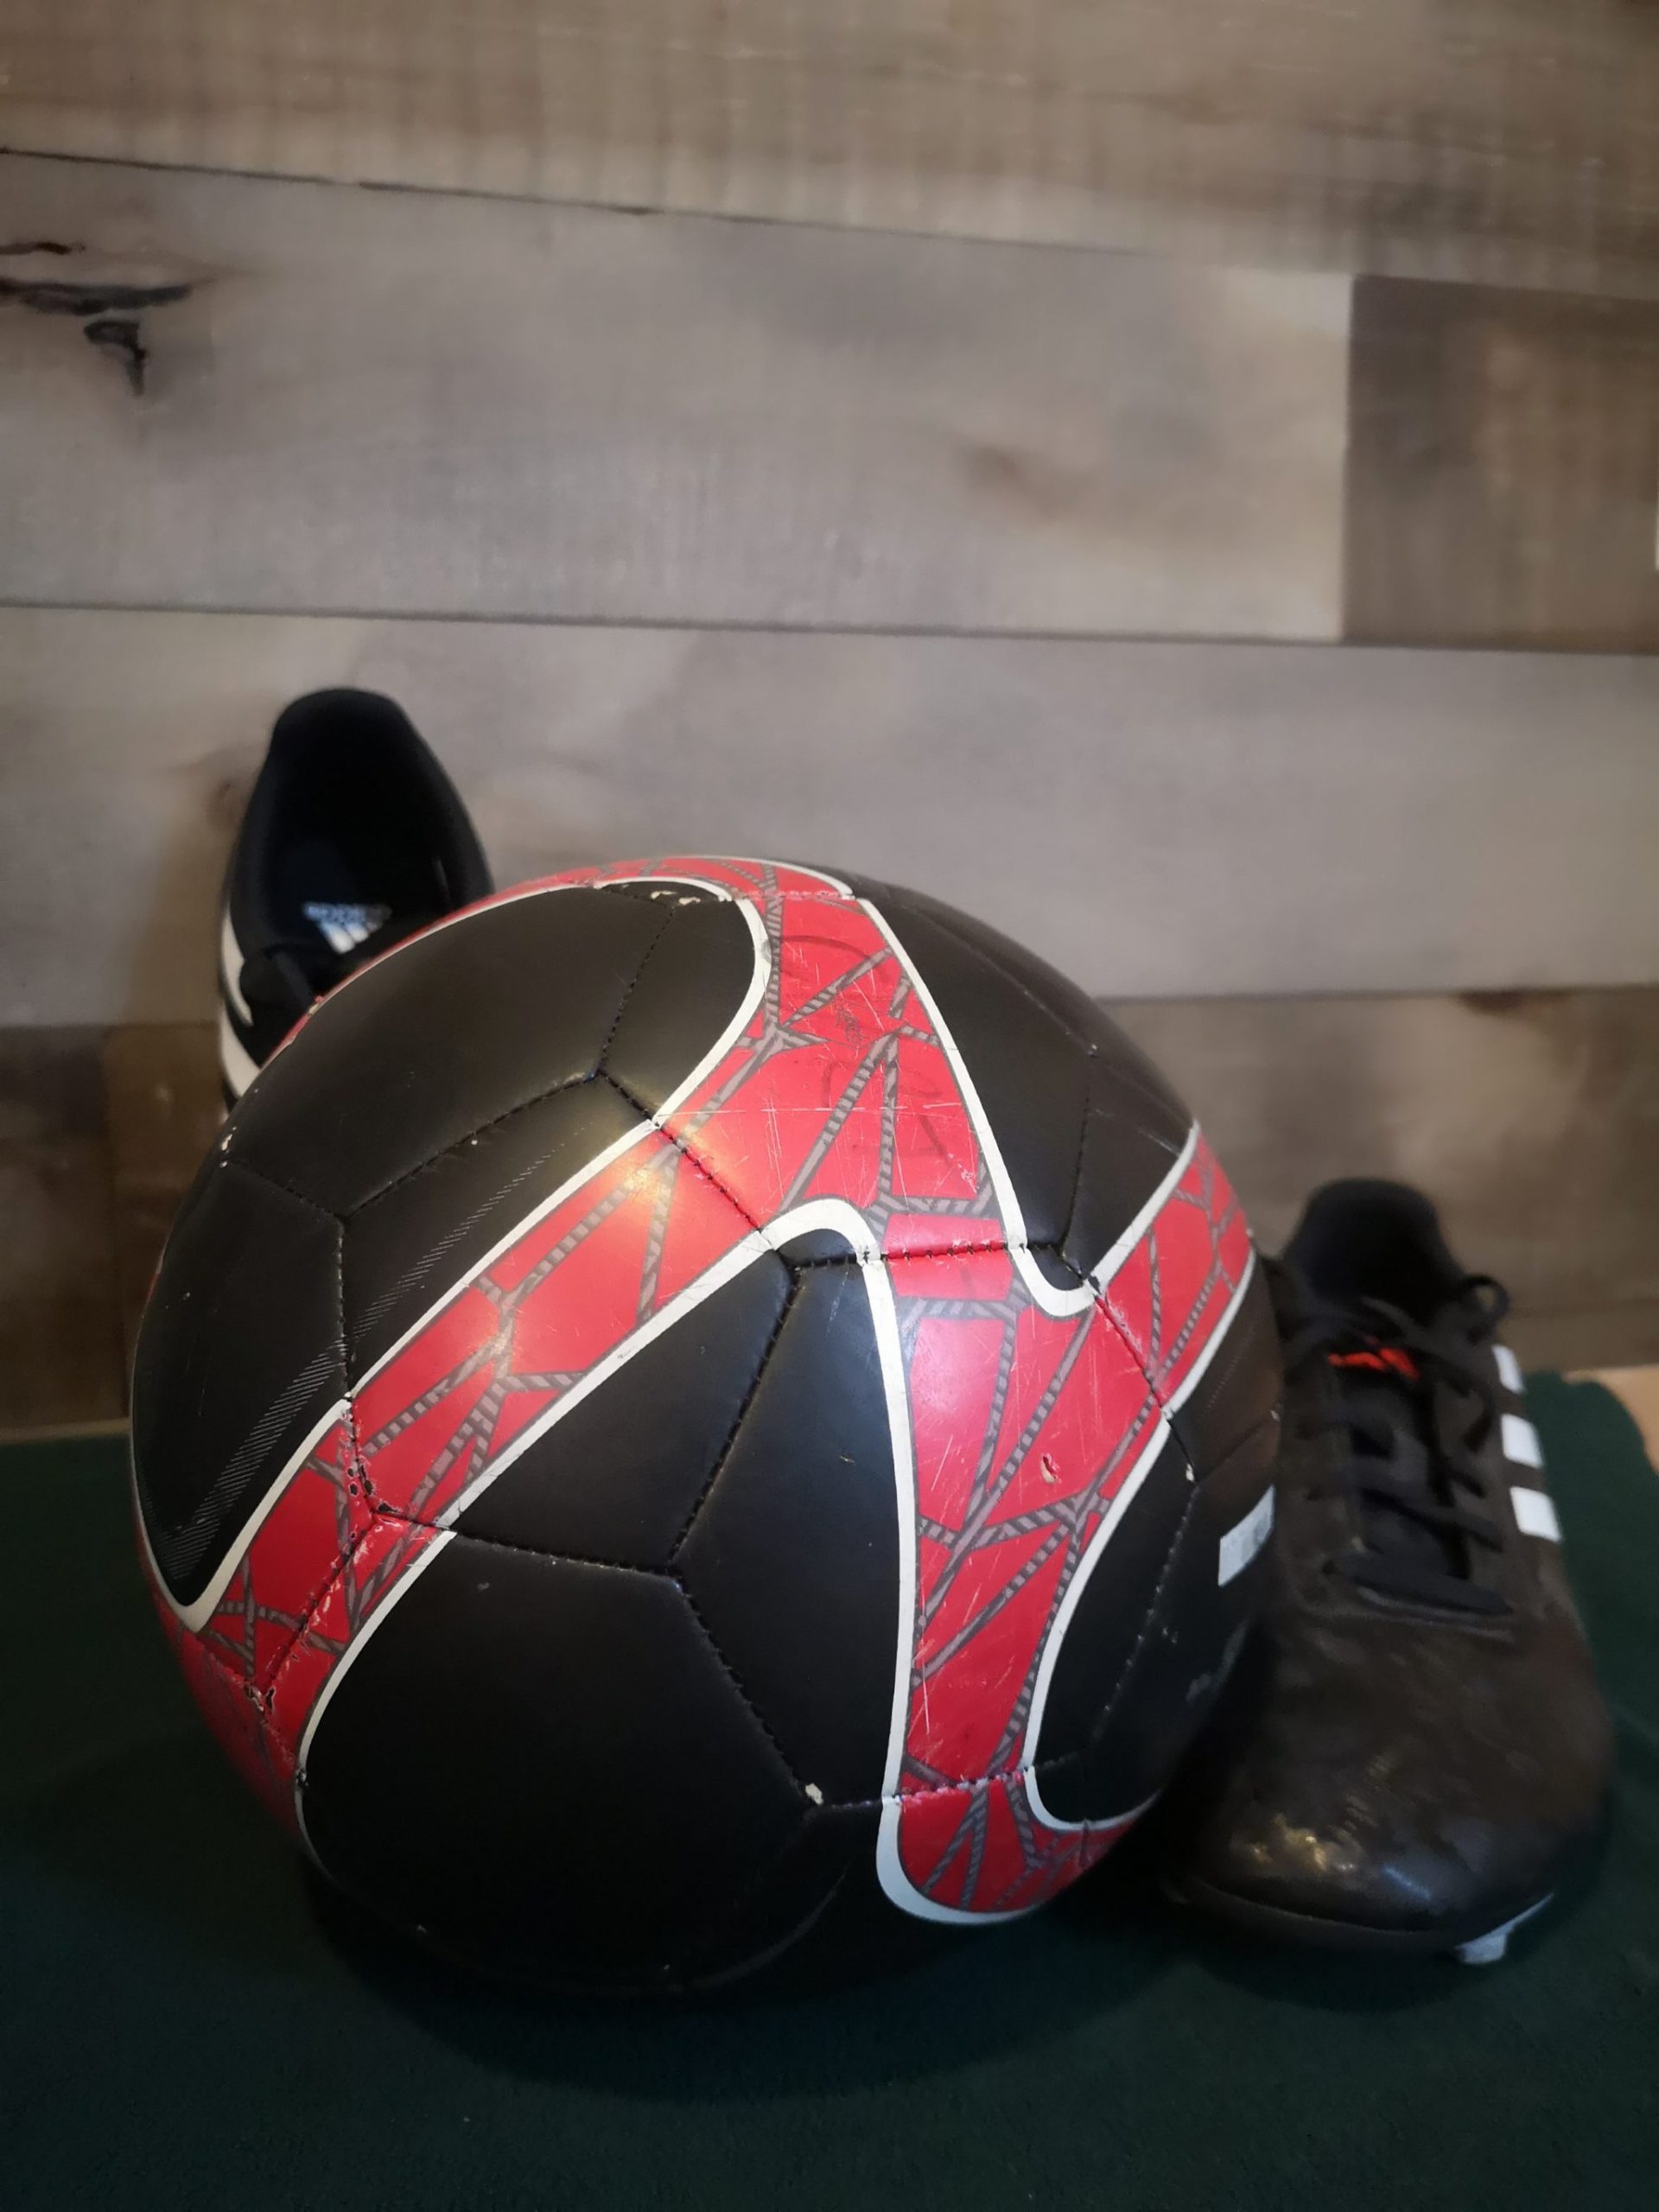 A soccer ball and cleats